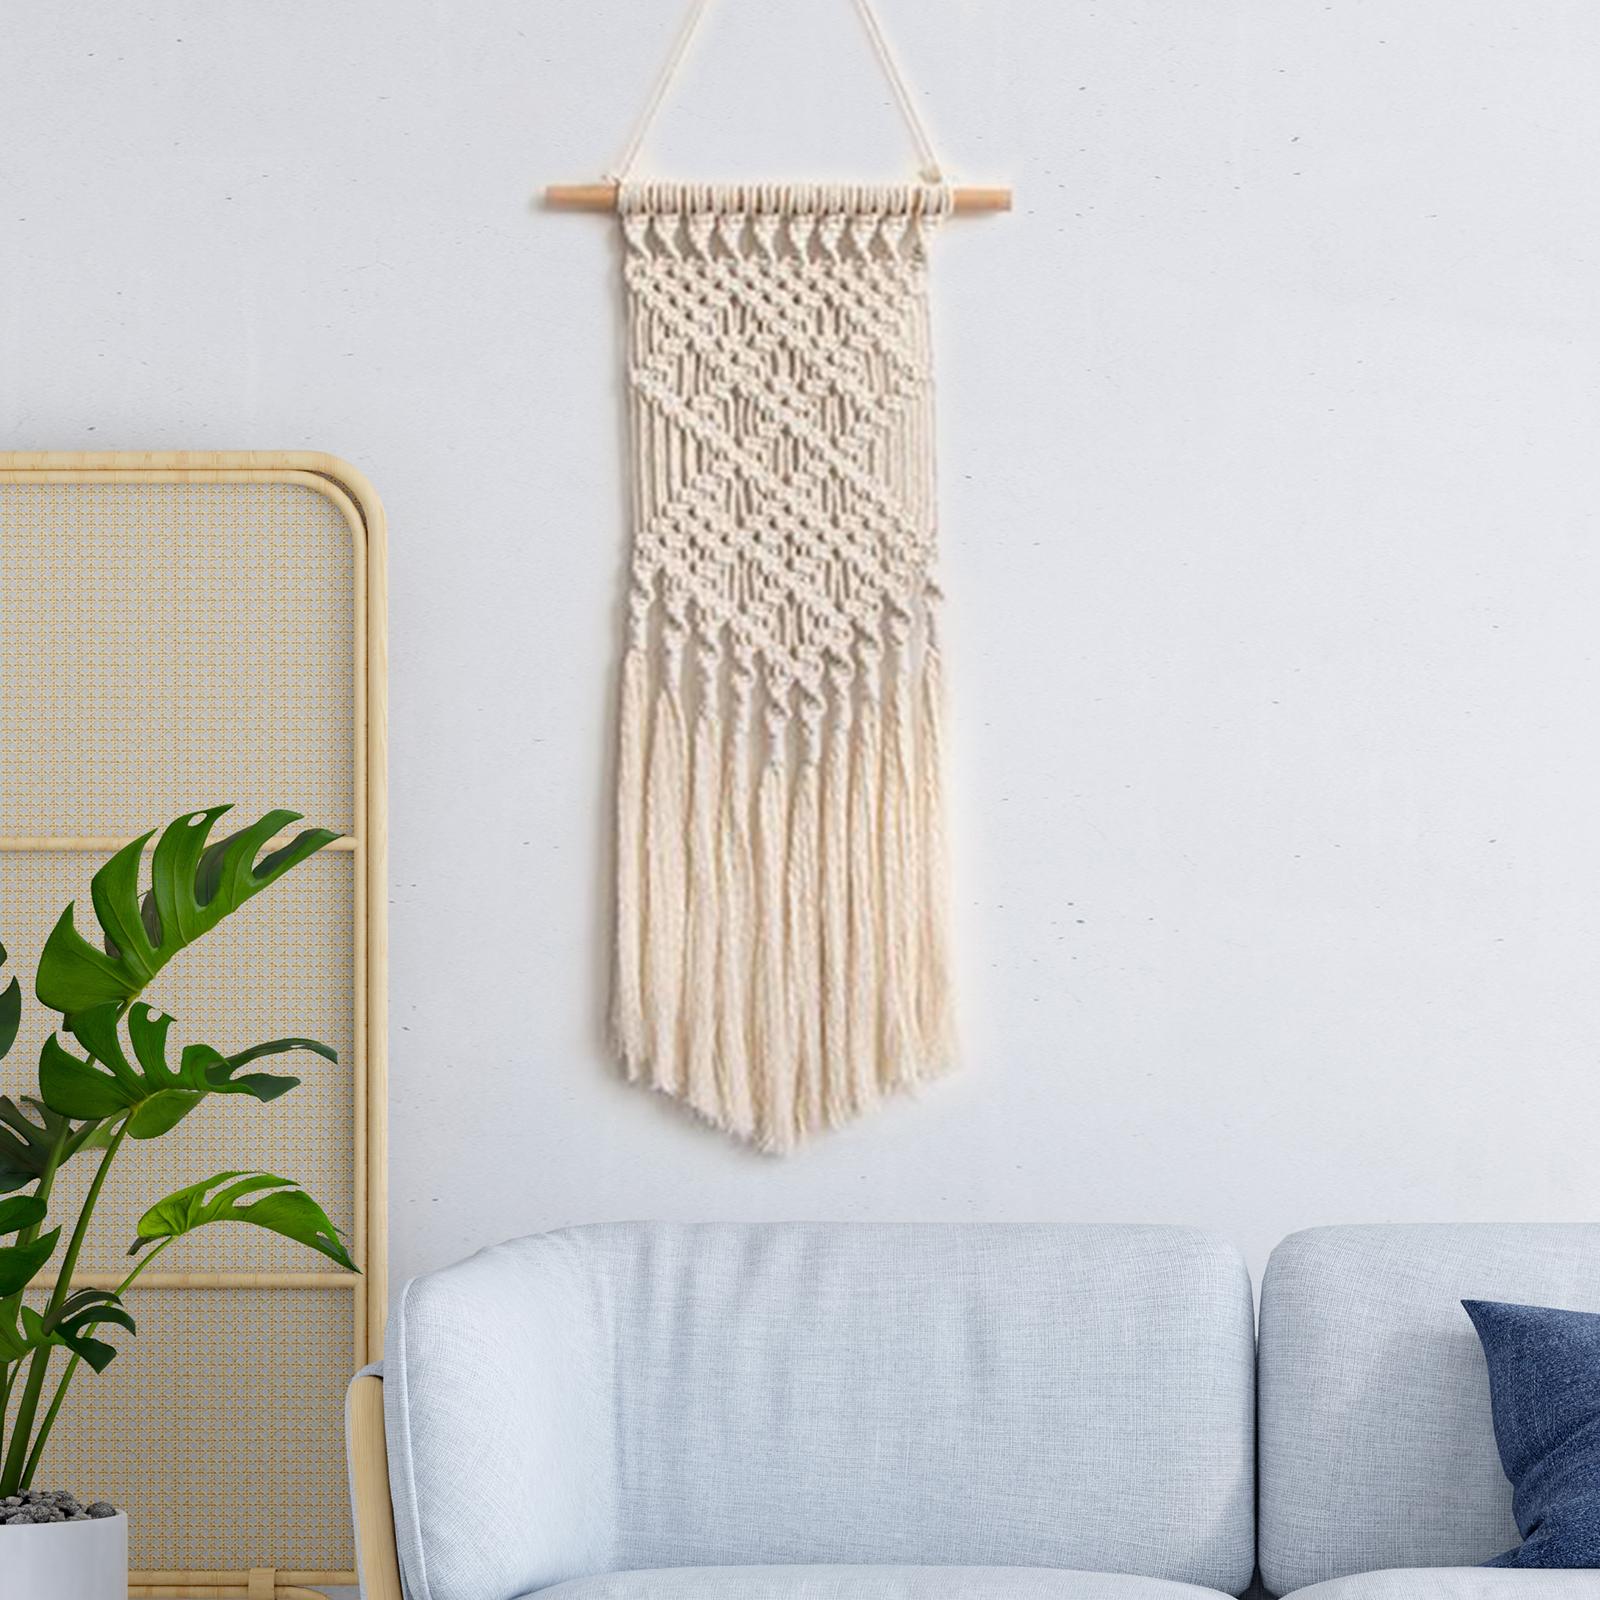 Macrame Wall Hanging Bohemian Chic Hand Woven Tapestry for Apartment Gallery 30cmx60cm